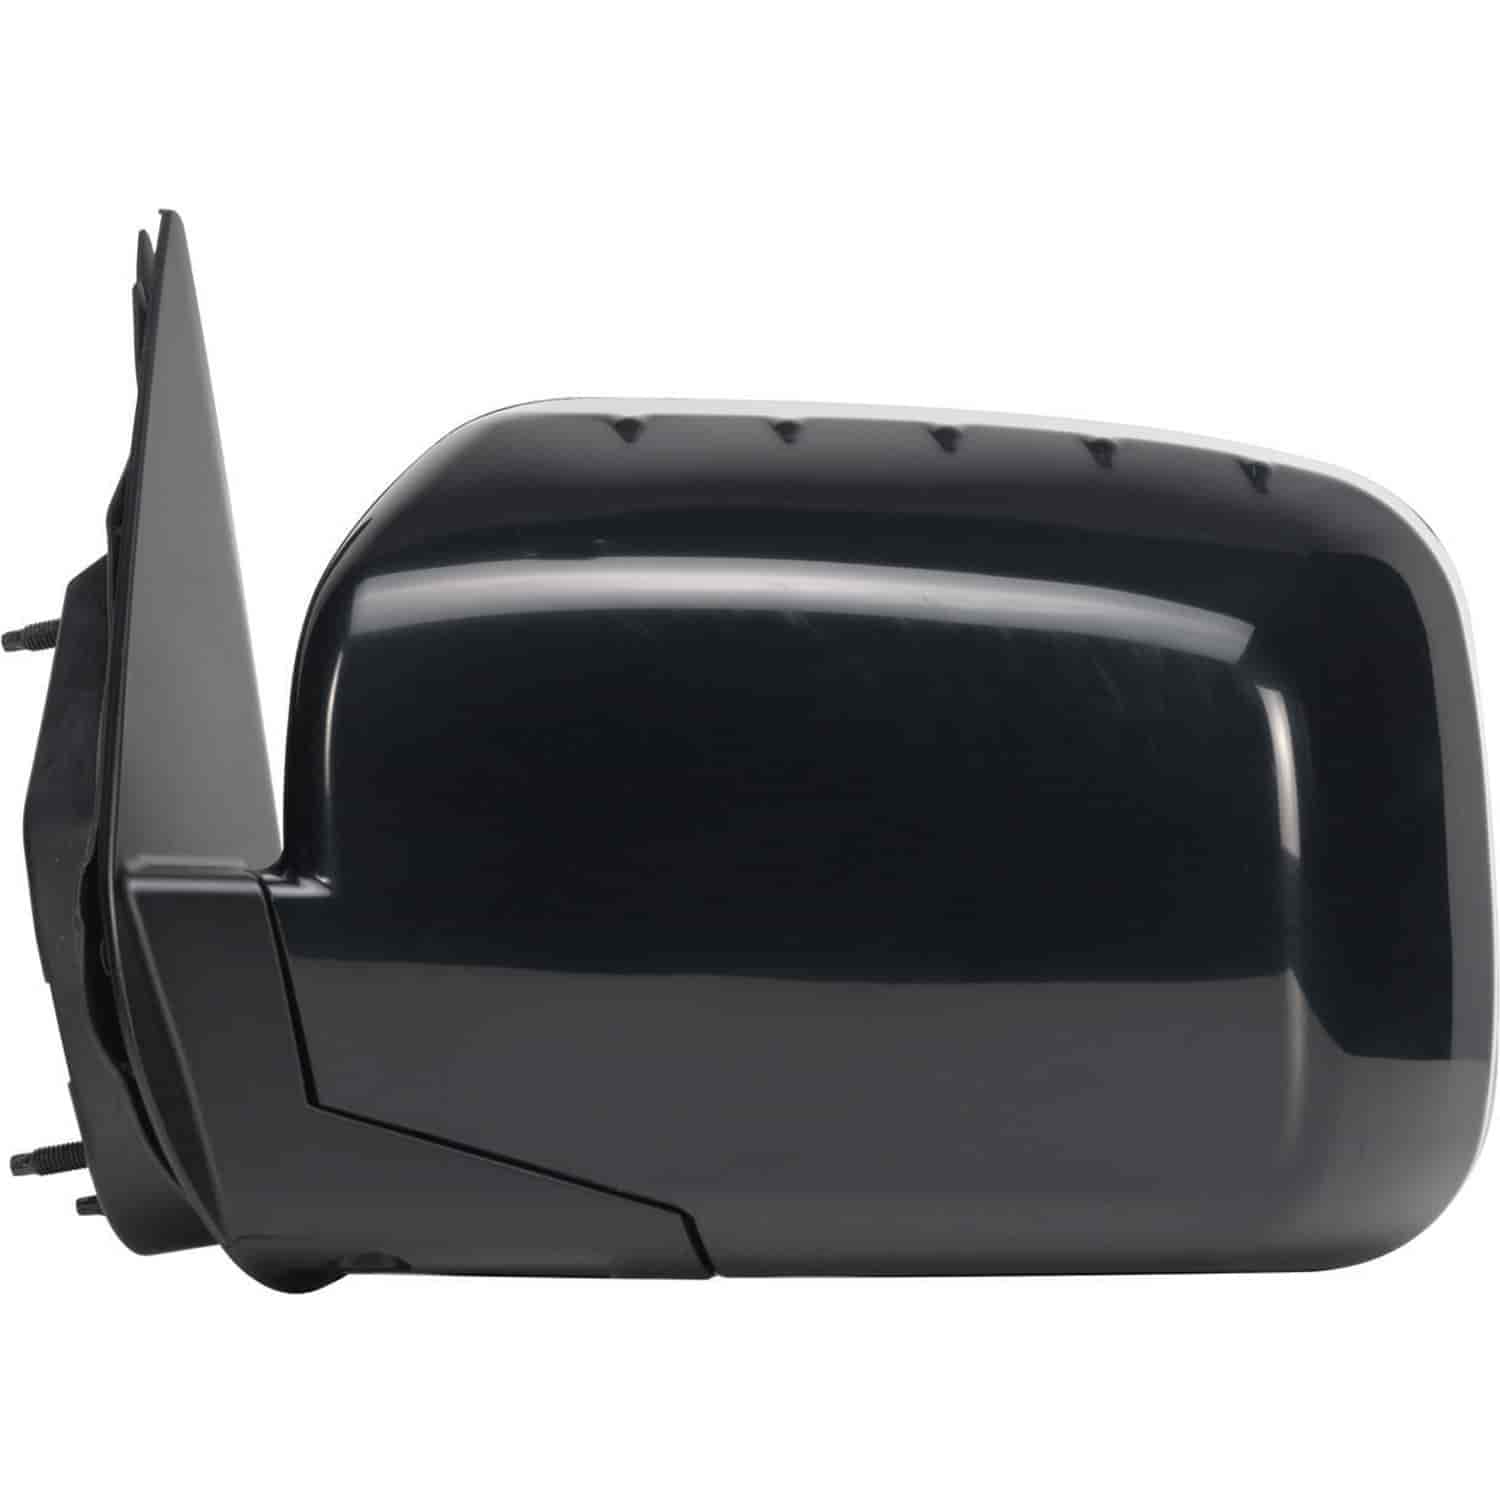 OEM Style Replacement mirror for 06-14 Honda Ridgeline driver side mirror tested to fit and function